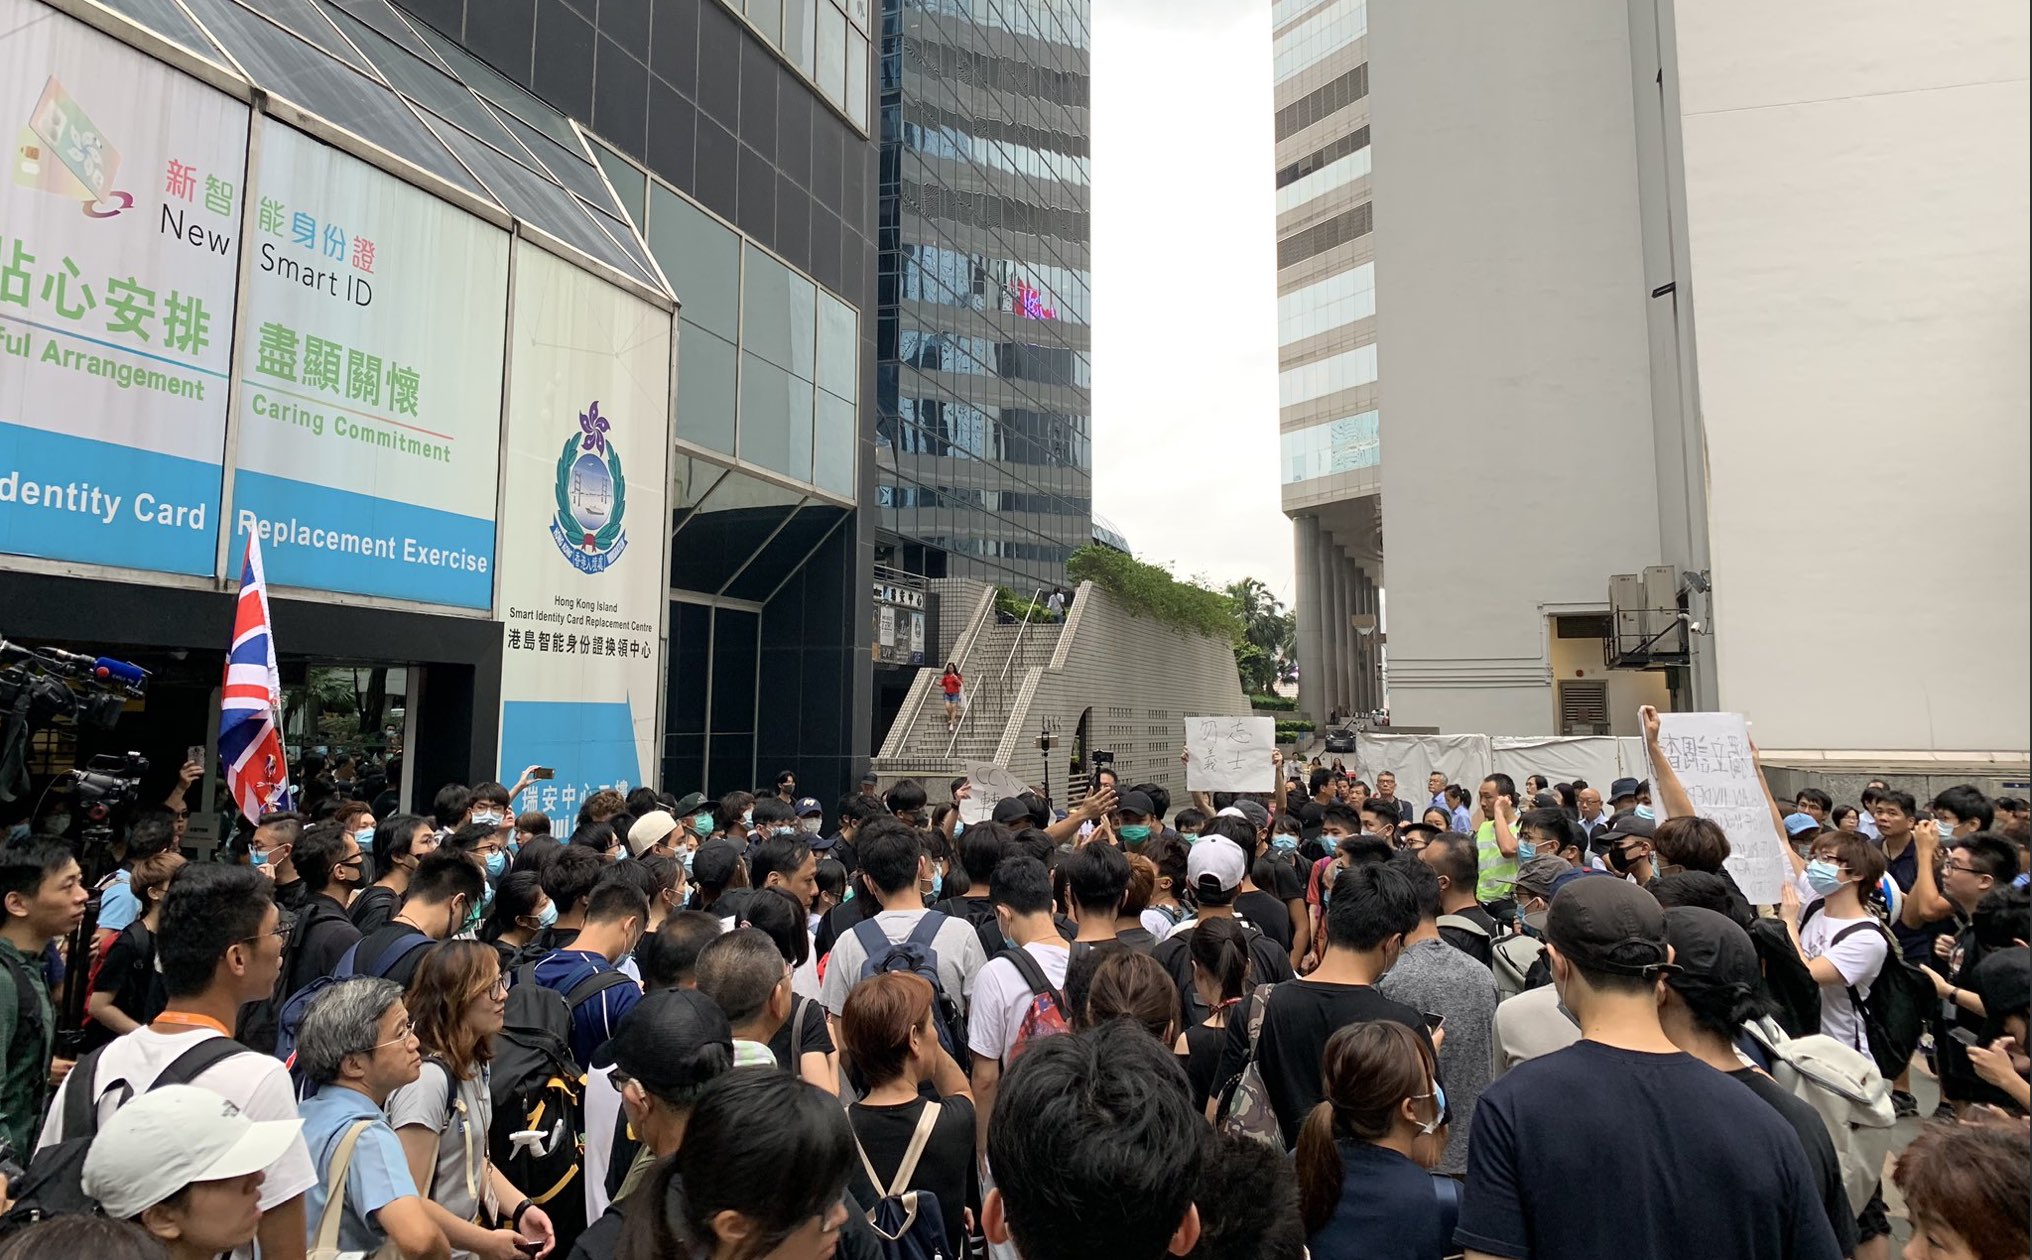 Protesters gathered outside the Revenue Tower in Wan Chai protesting the extradition bill. Photo via Twitter/@HongKongHermit.